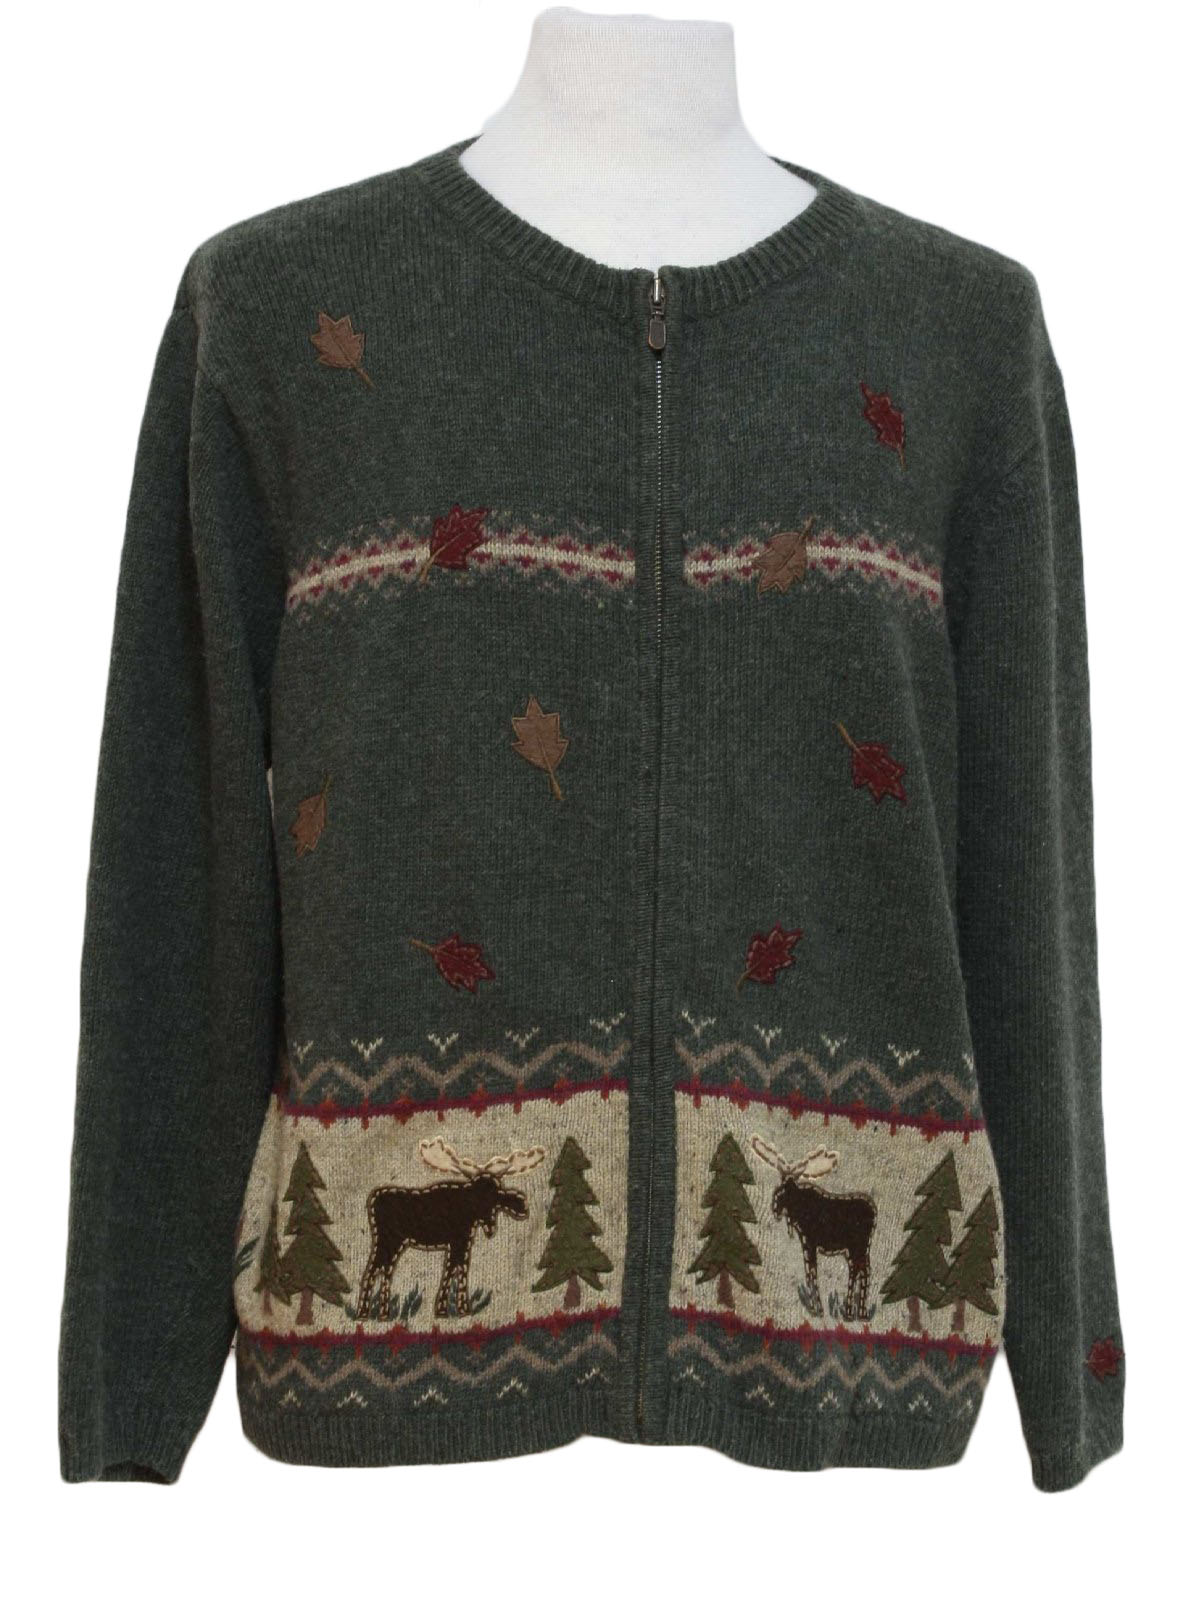 Womens Ugly Christmas Sweater: -Croft and Barrow- Womens shades of grey ...